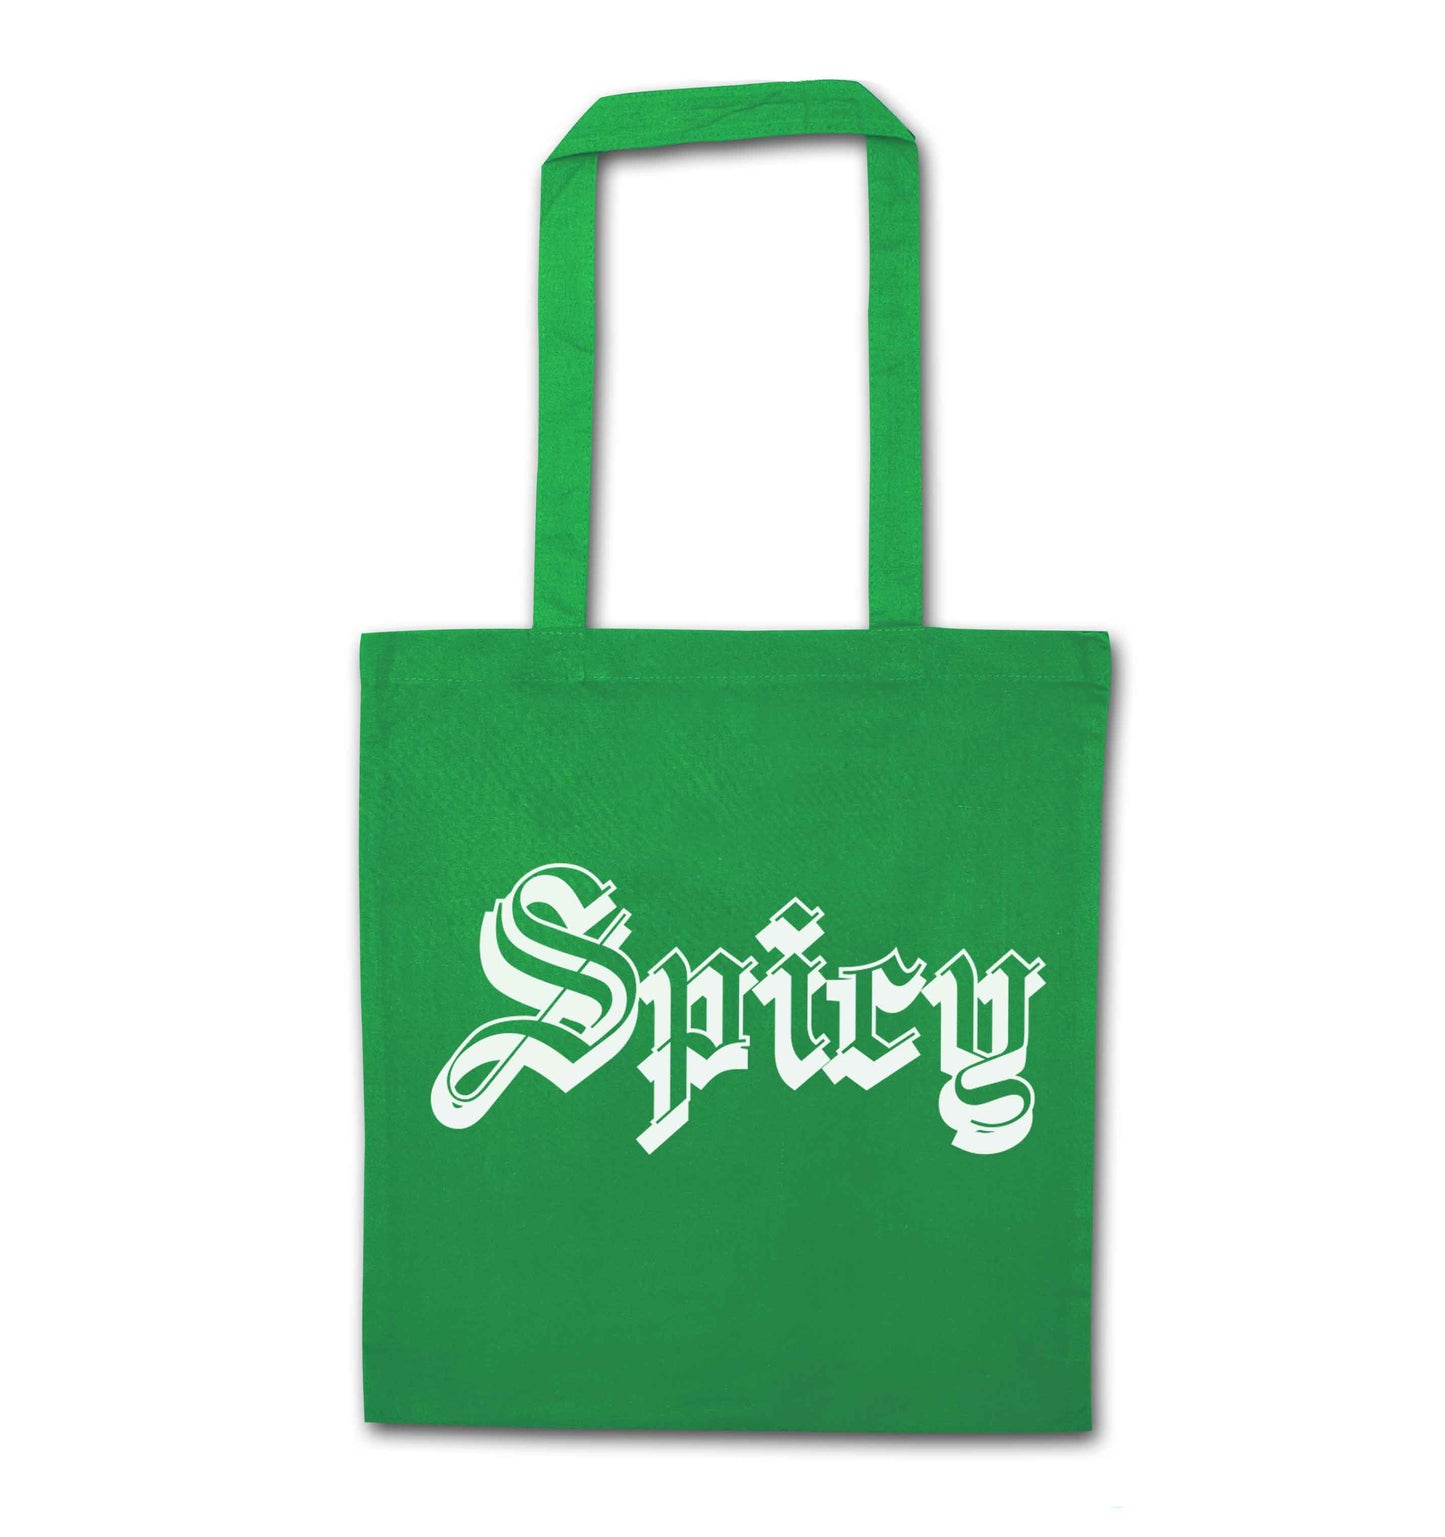 Spicy green tote bag